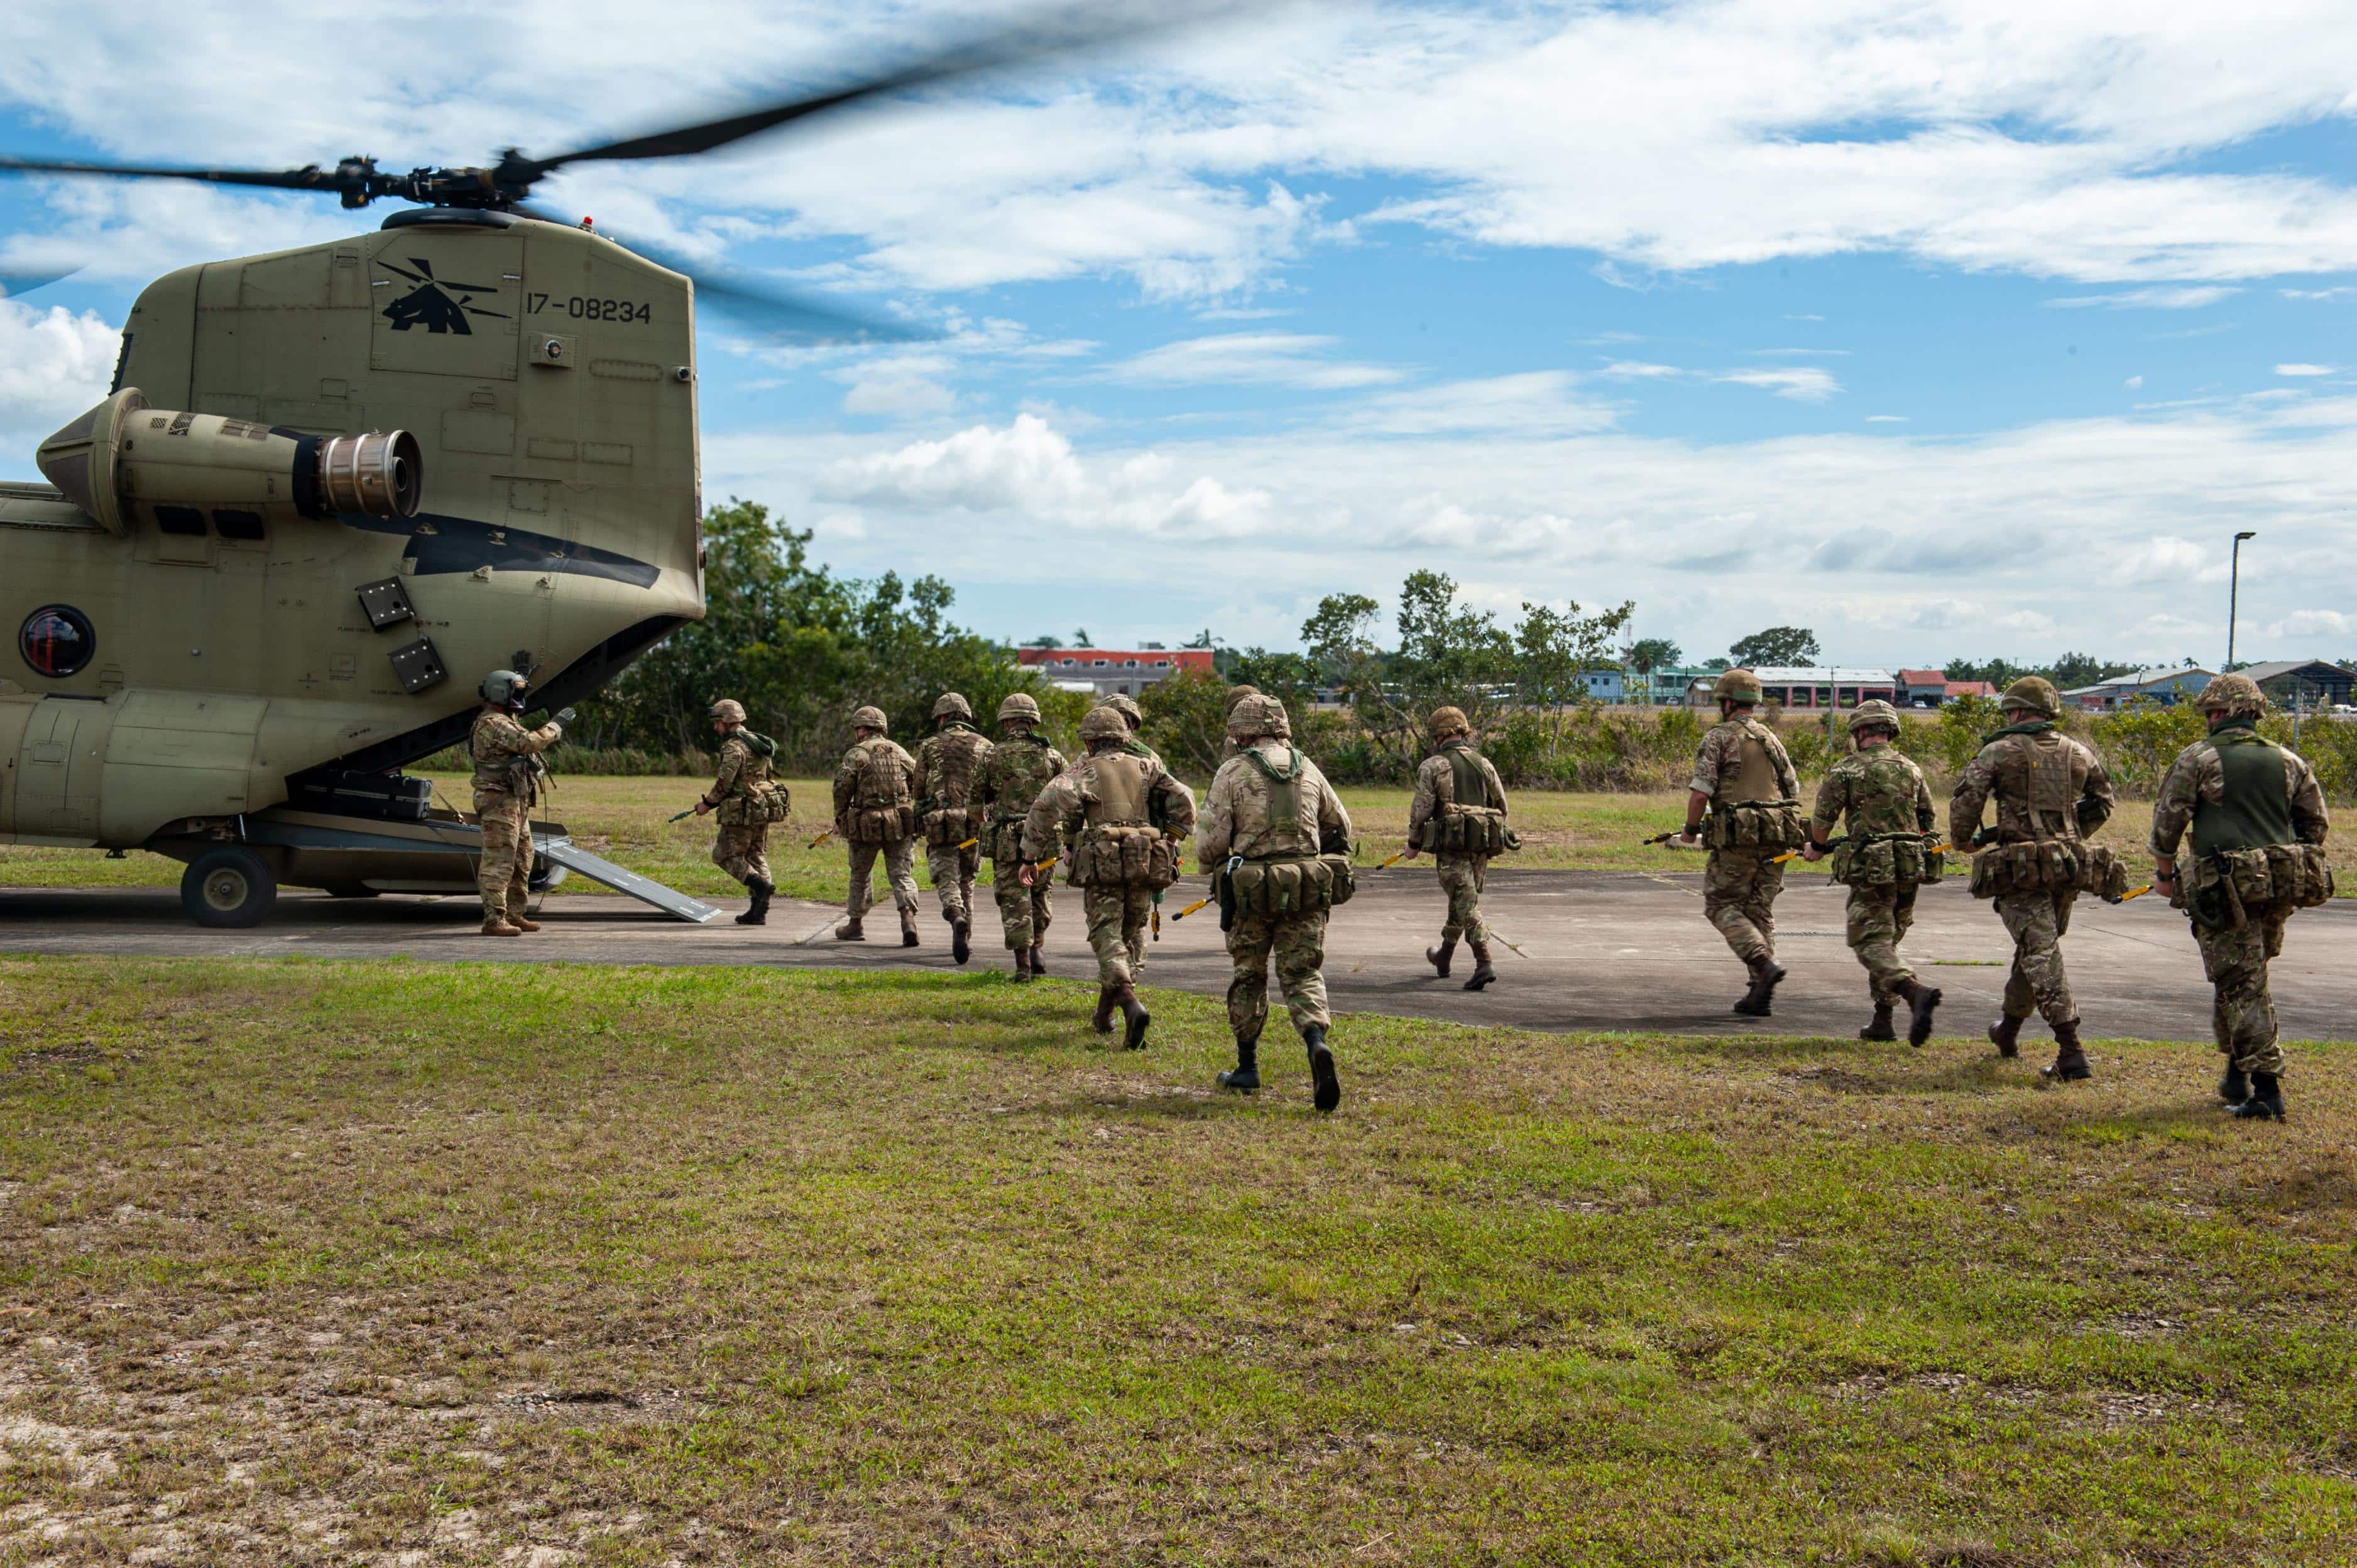 Service members from the British Army's 3rd Battalion Parachute Regiment (3 PARA), board a CH-47 Chinook assigned to Joint Task Force Bravo’s 1st Battalion, 228th Aviation Regiment before taking off from British Army Training Support Unit Belize, Belize, Feb. 8, during a joint air assault training exercise. JTF-Bravo routinely trains with mission partners to better prepare for joint operations within Central America and provide support when requested from host nations. (U.S. Air Force photo by Capt. Allen Palmer)